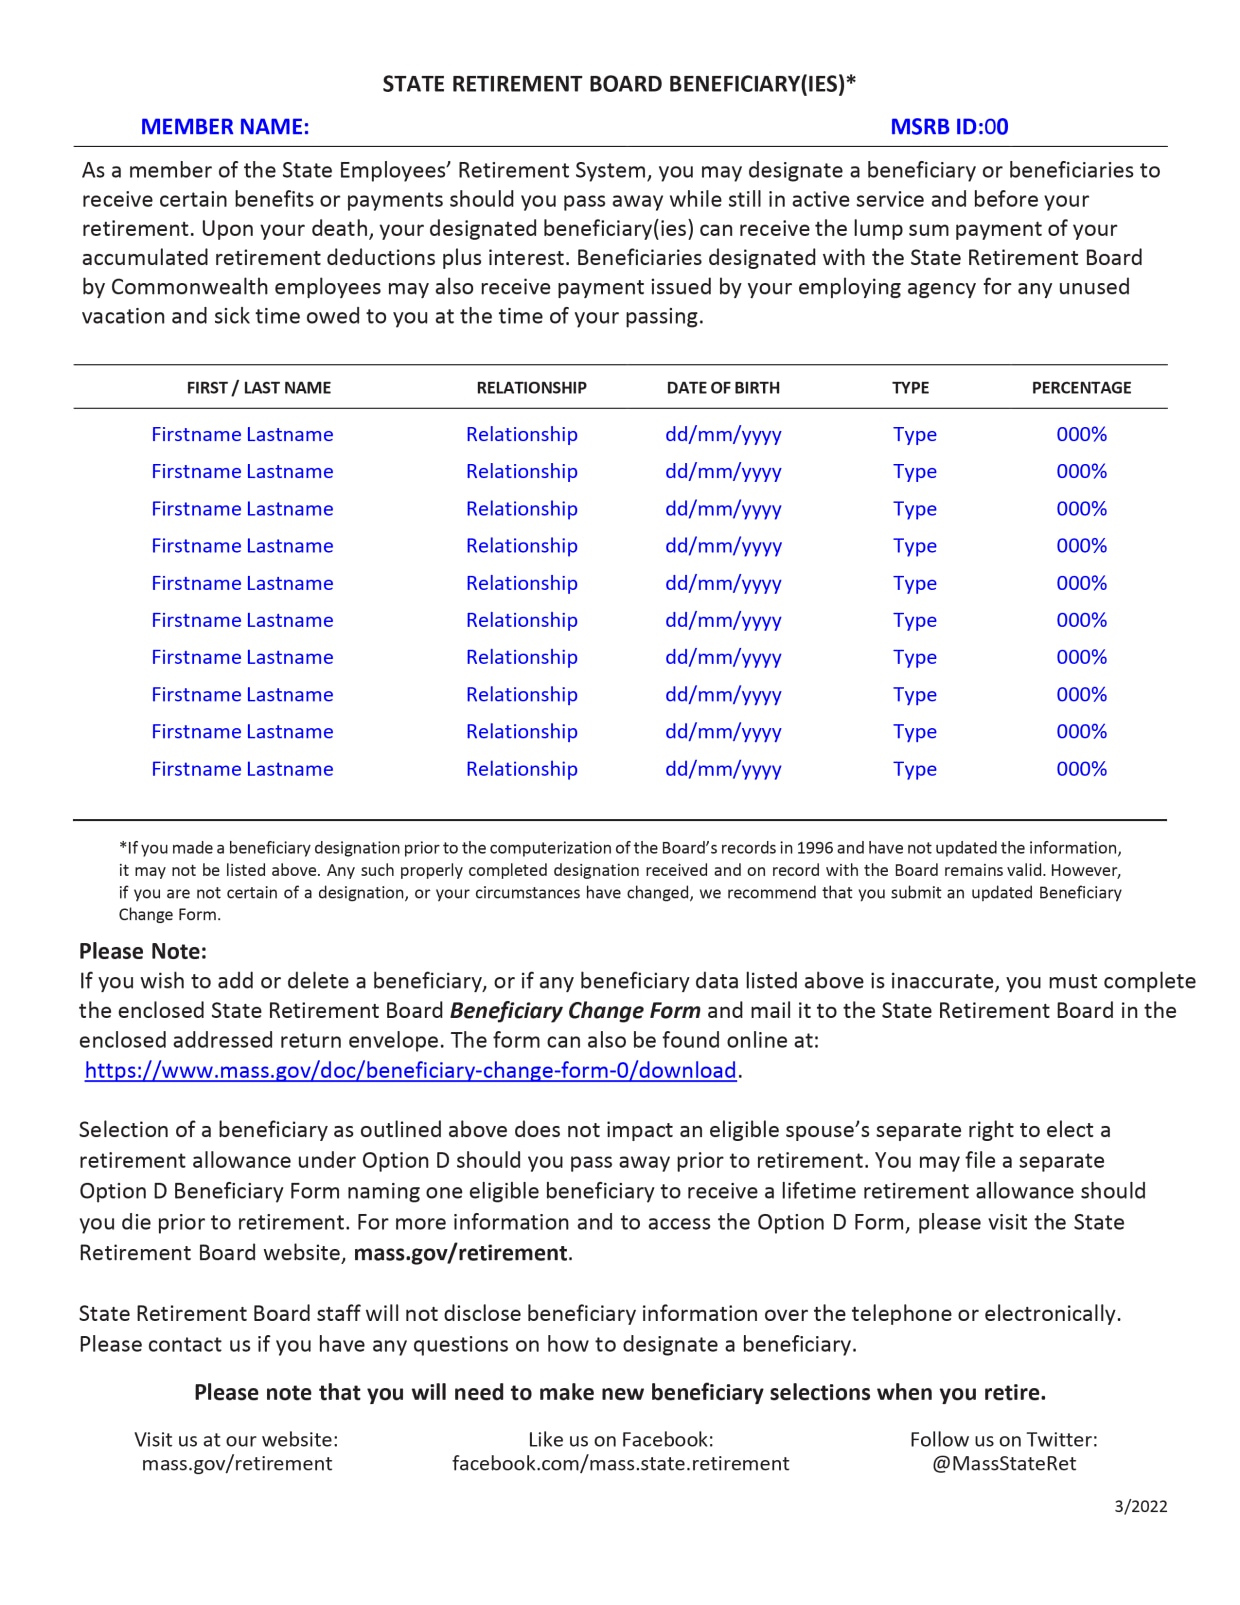 Page 2 Sample of 2021 MSERS Annuity Savings Account Annual Statement